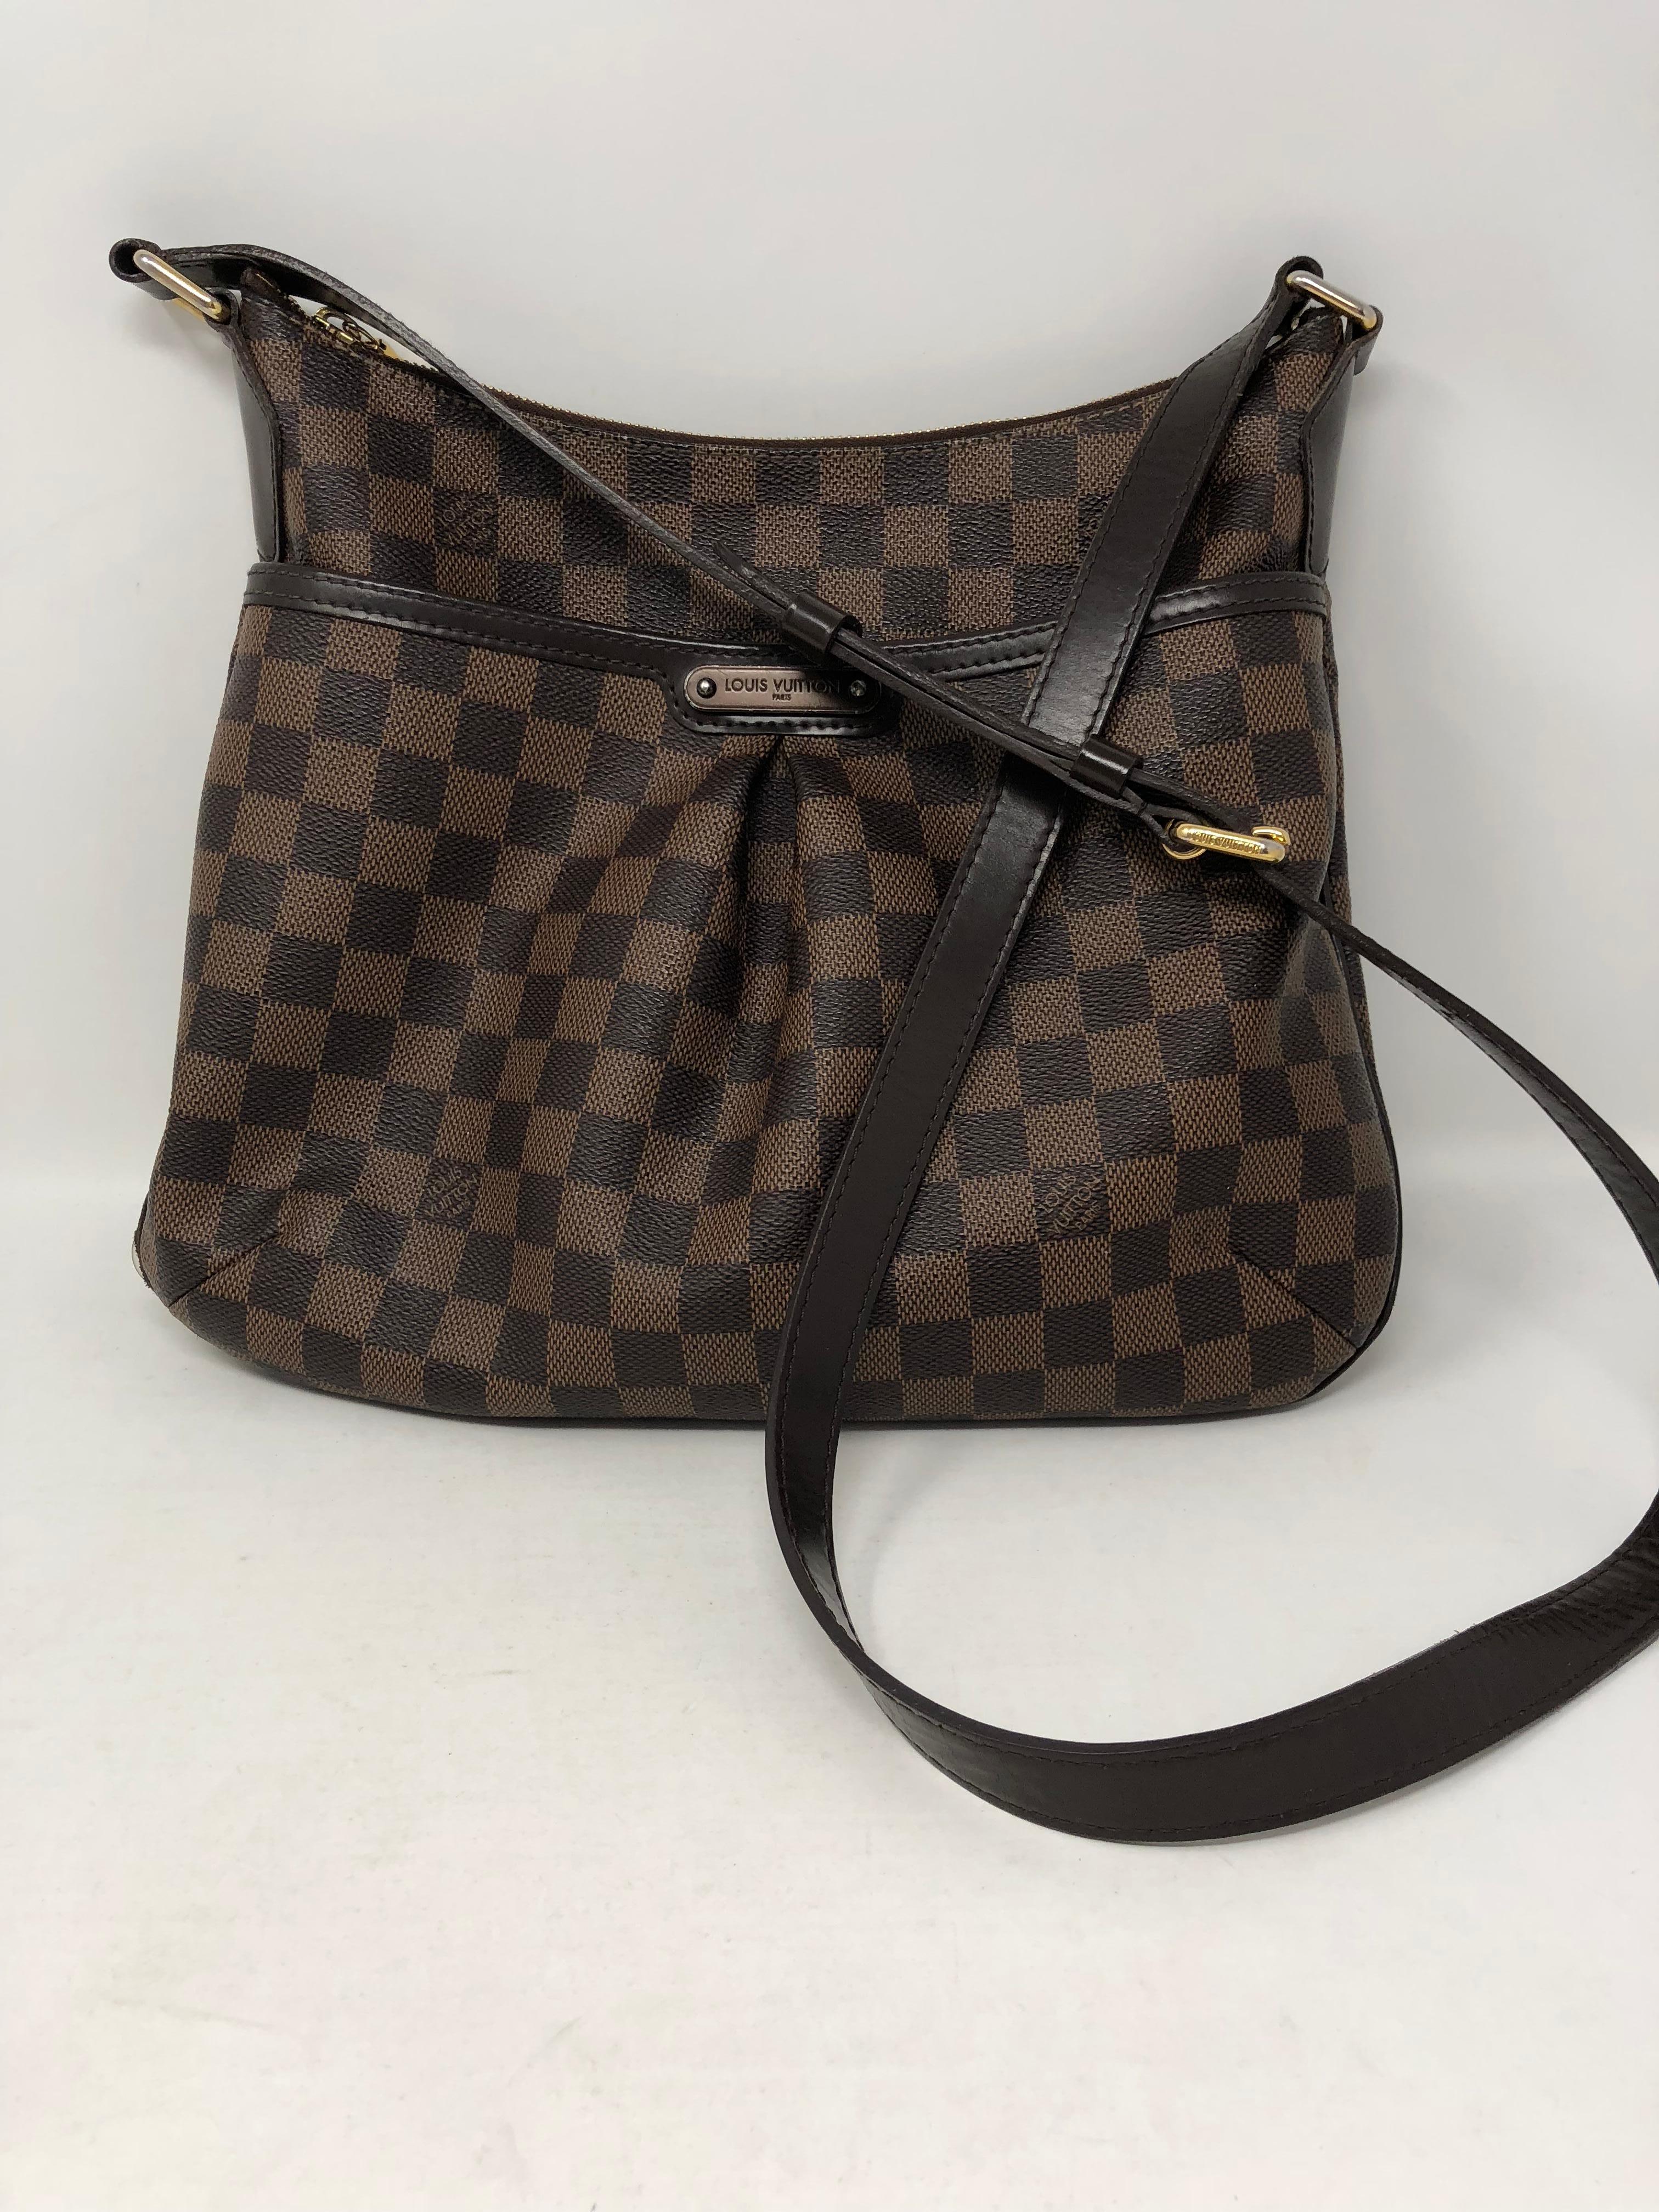 Louis Vuitton Damier Ebene Bloomsbury GM Crossbody bag. Discontinued style from LV and in damier ebene pattern. Has a front pocket to hold more. Good condition. Light wear inside. Guaranteed authentic. 